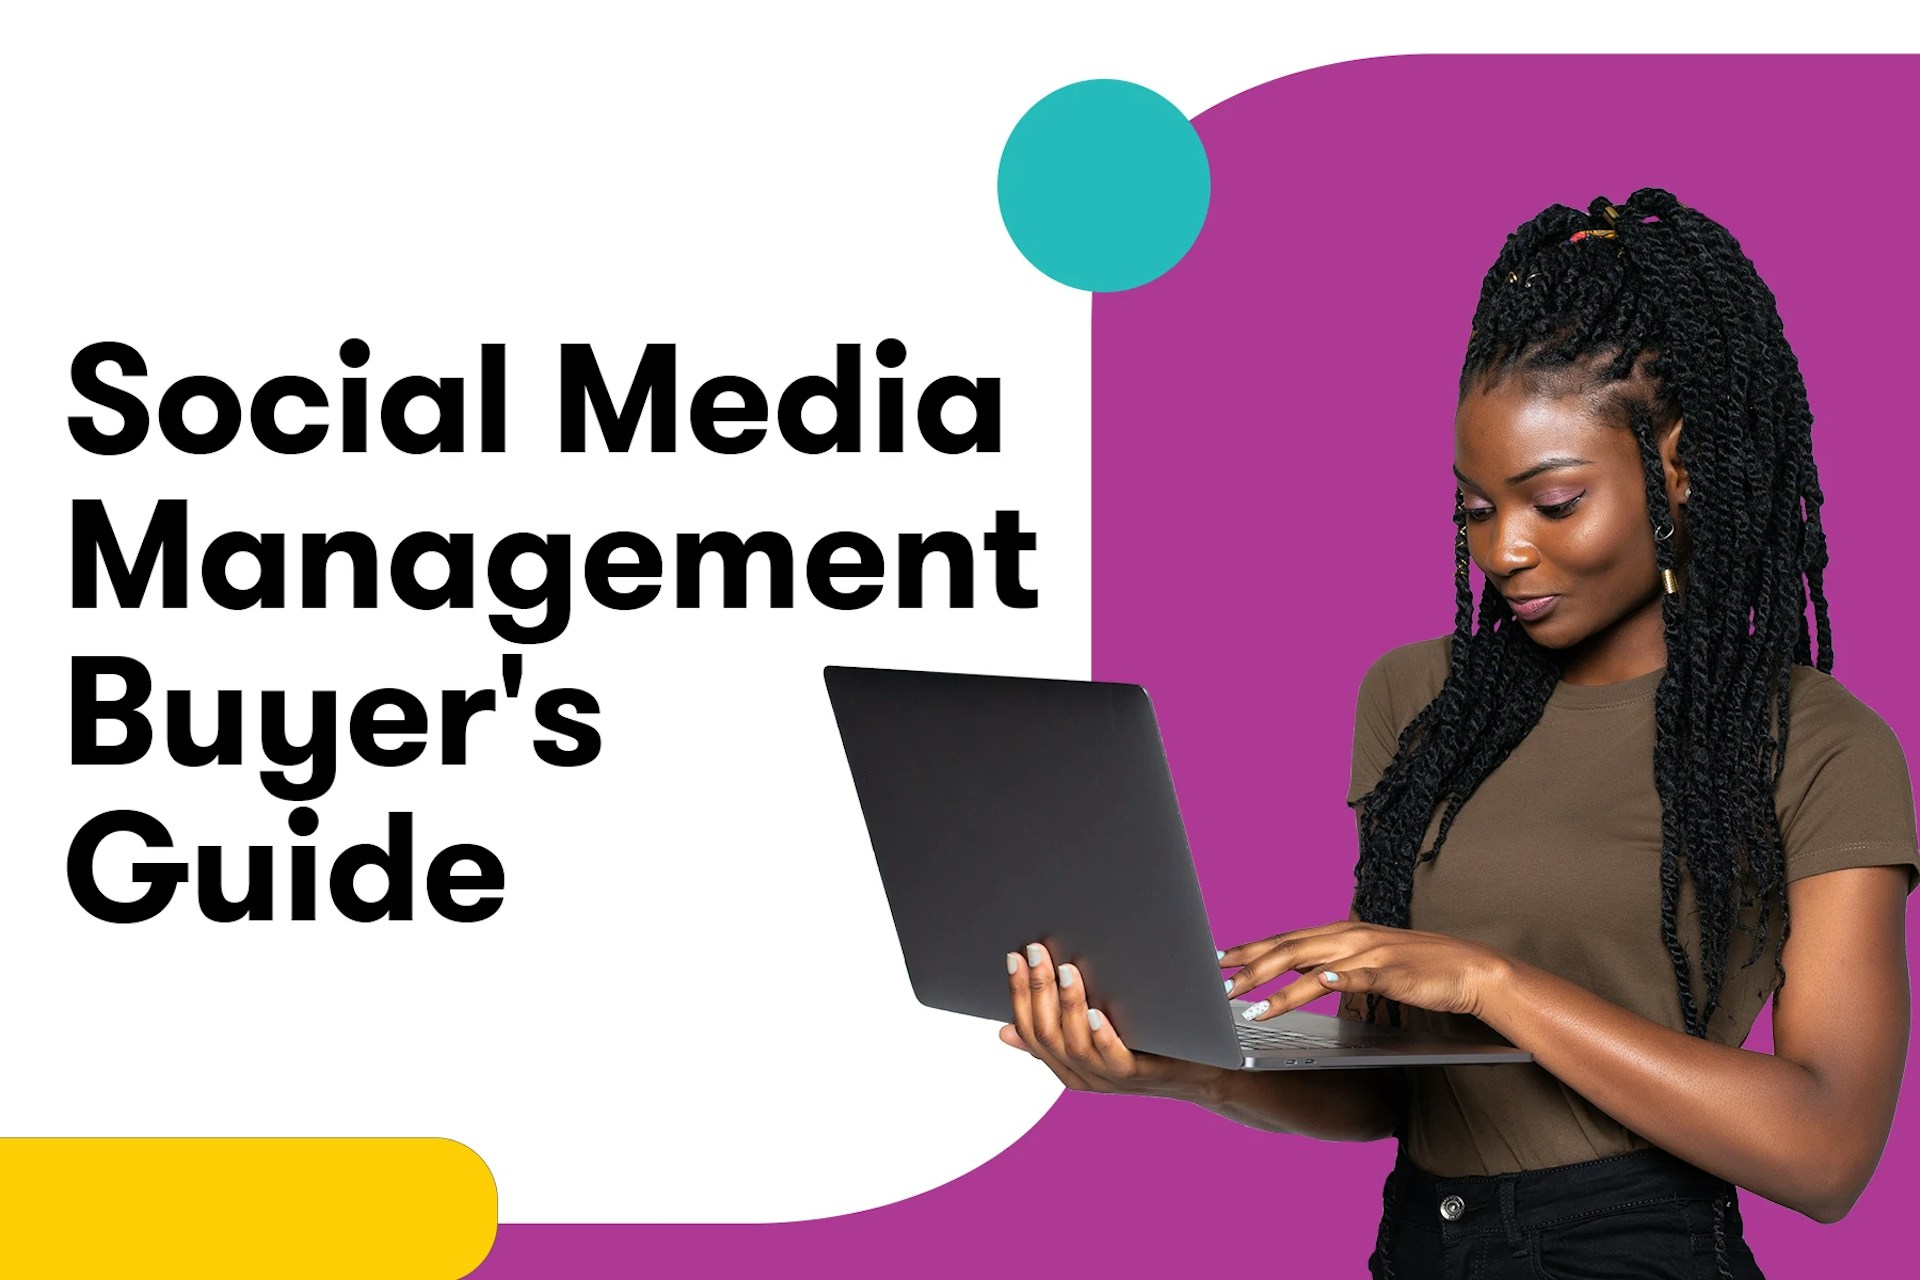 Meltwater Social Media Management Buyer's Guide